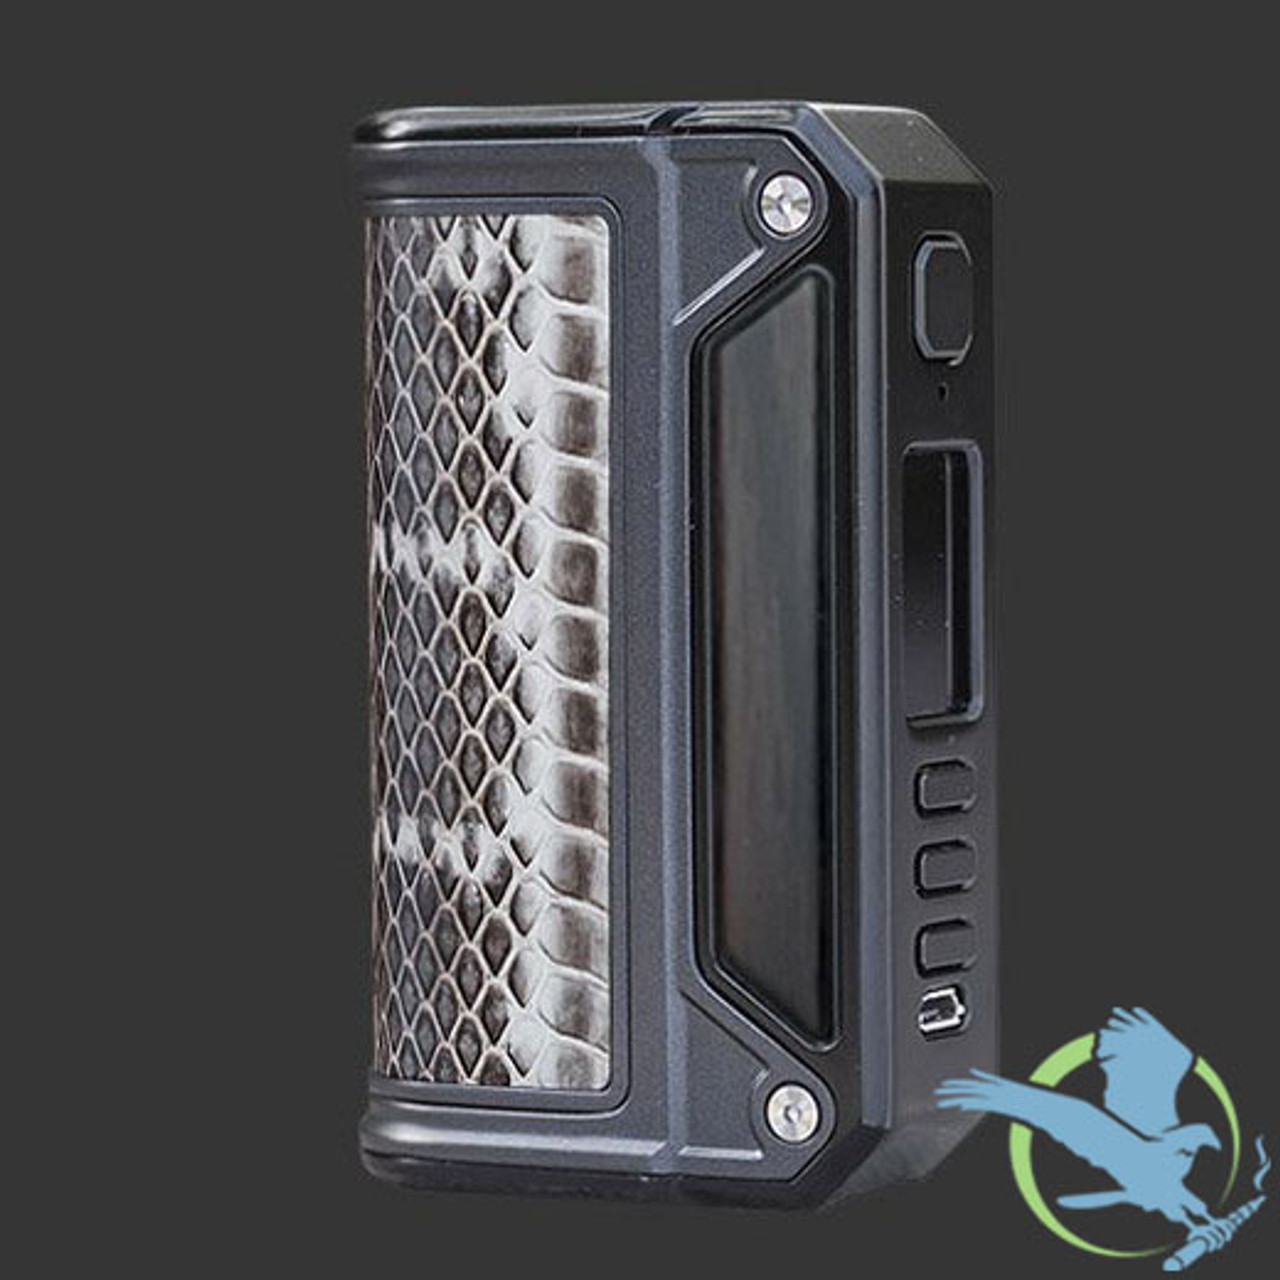 Snake_Skin_Therion_DNA_75C_Box_Mod_Black_Frame_With_Wood_Inlay__80317.1497289847.jpg